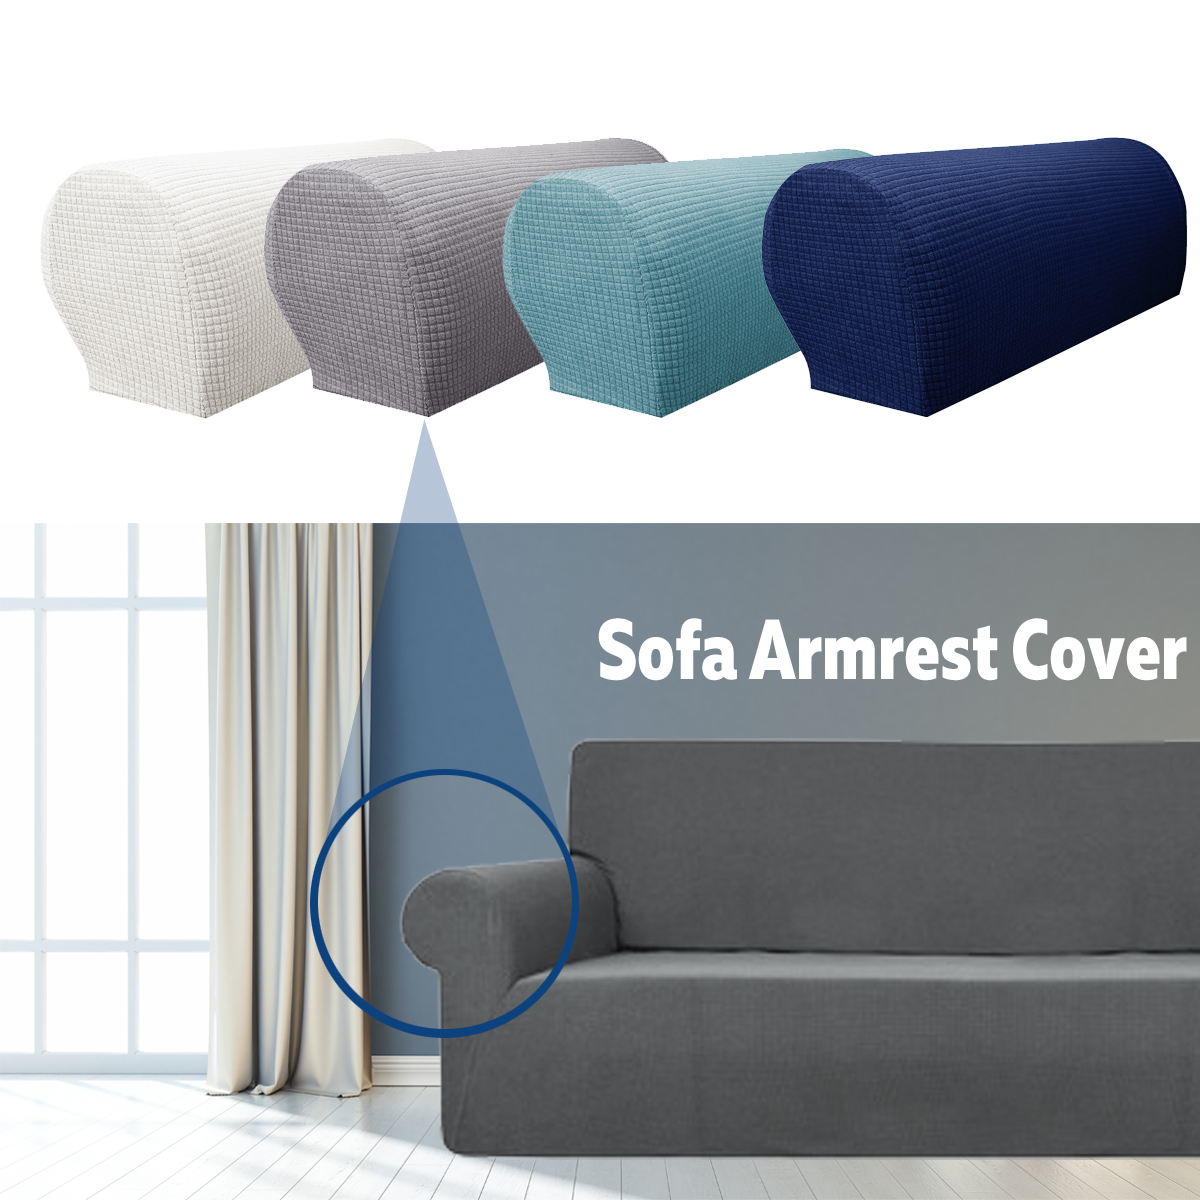 Sofa-Armrest-Covers-Stretch-Fabric-Arm-Protectors-Chair-Covers-For-Couches-Armchairs-Slipcover-1412686-2